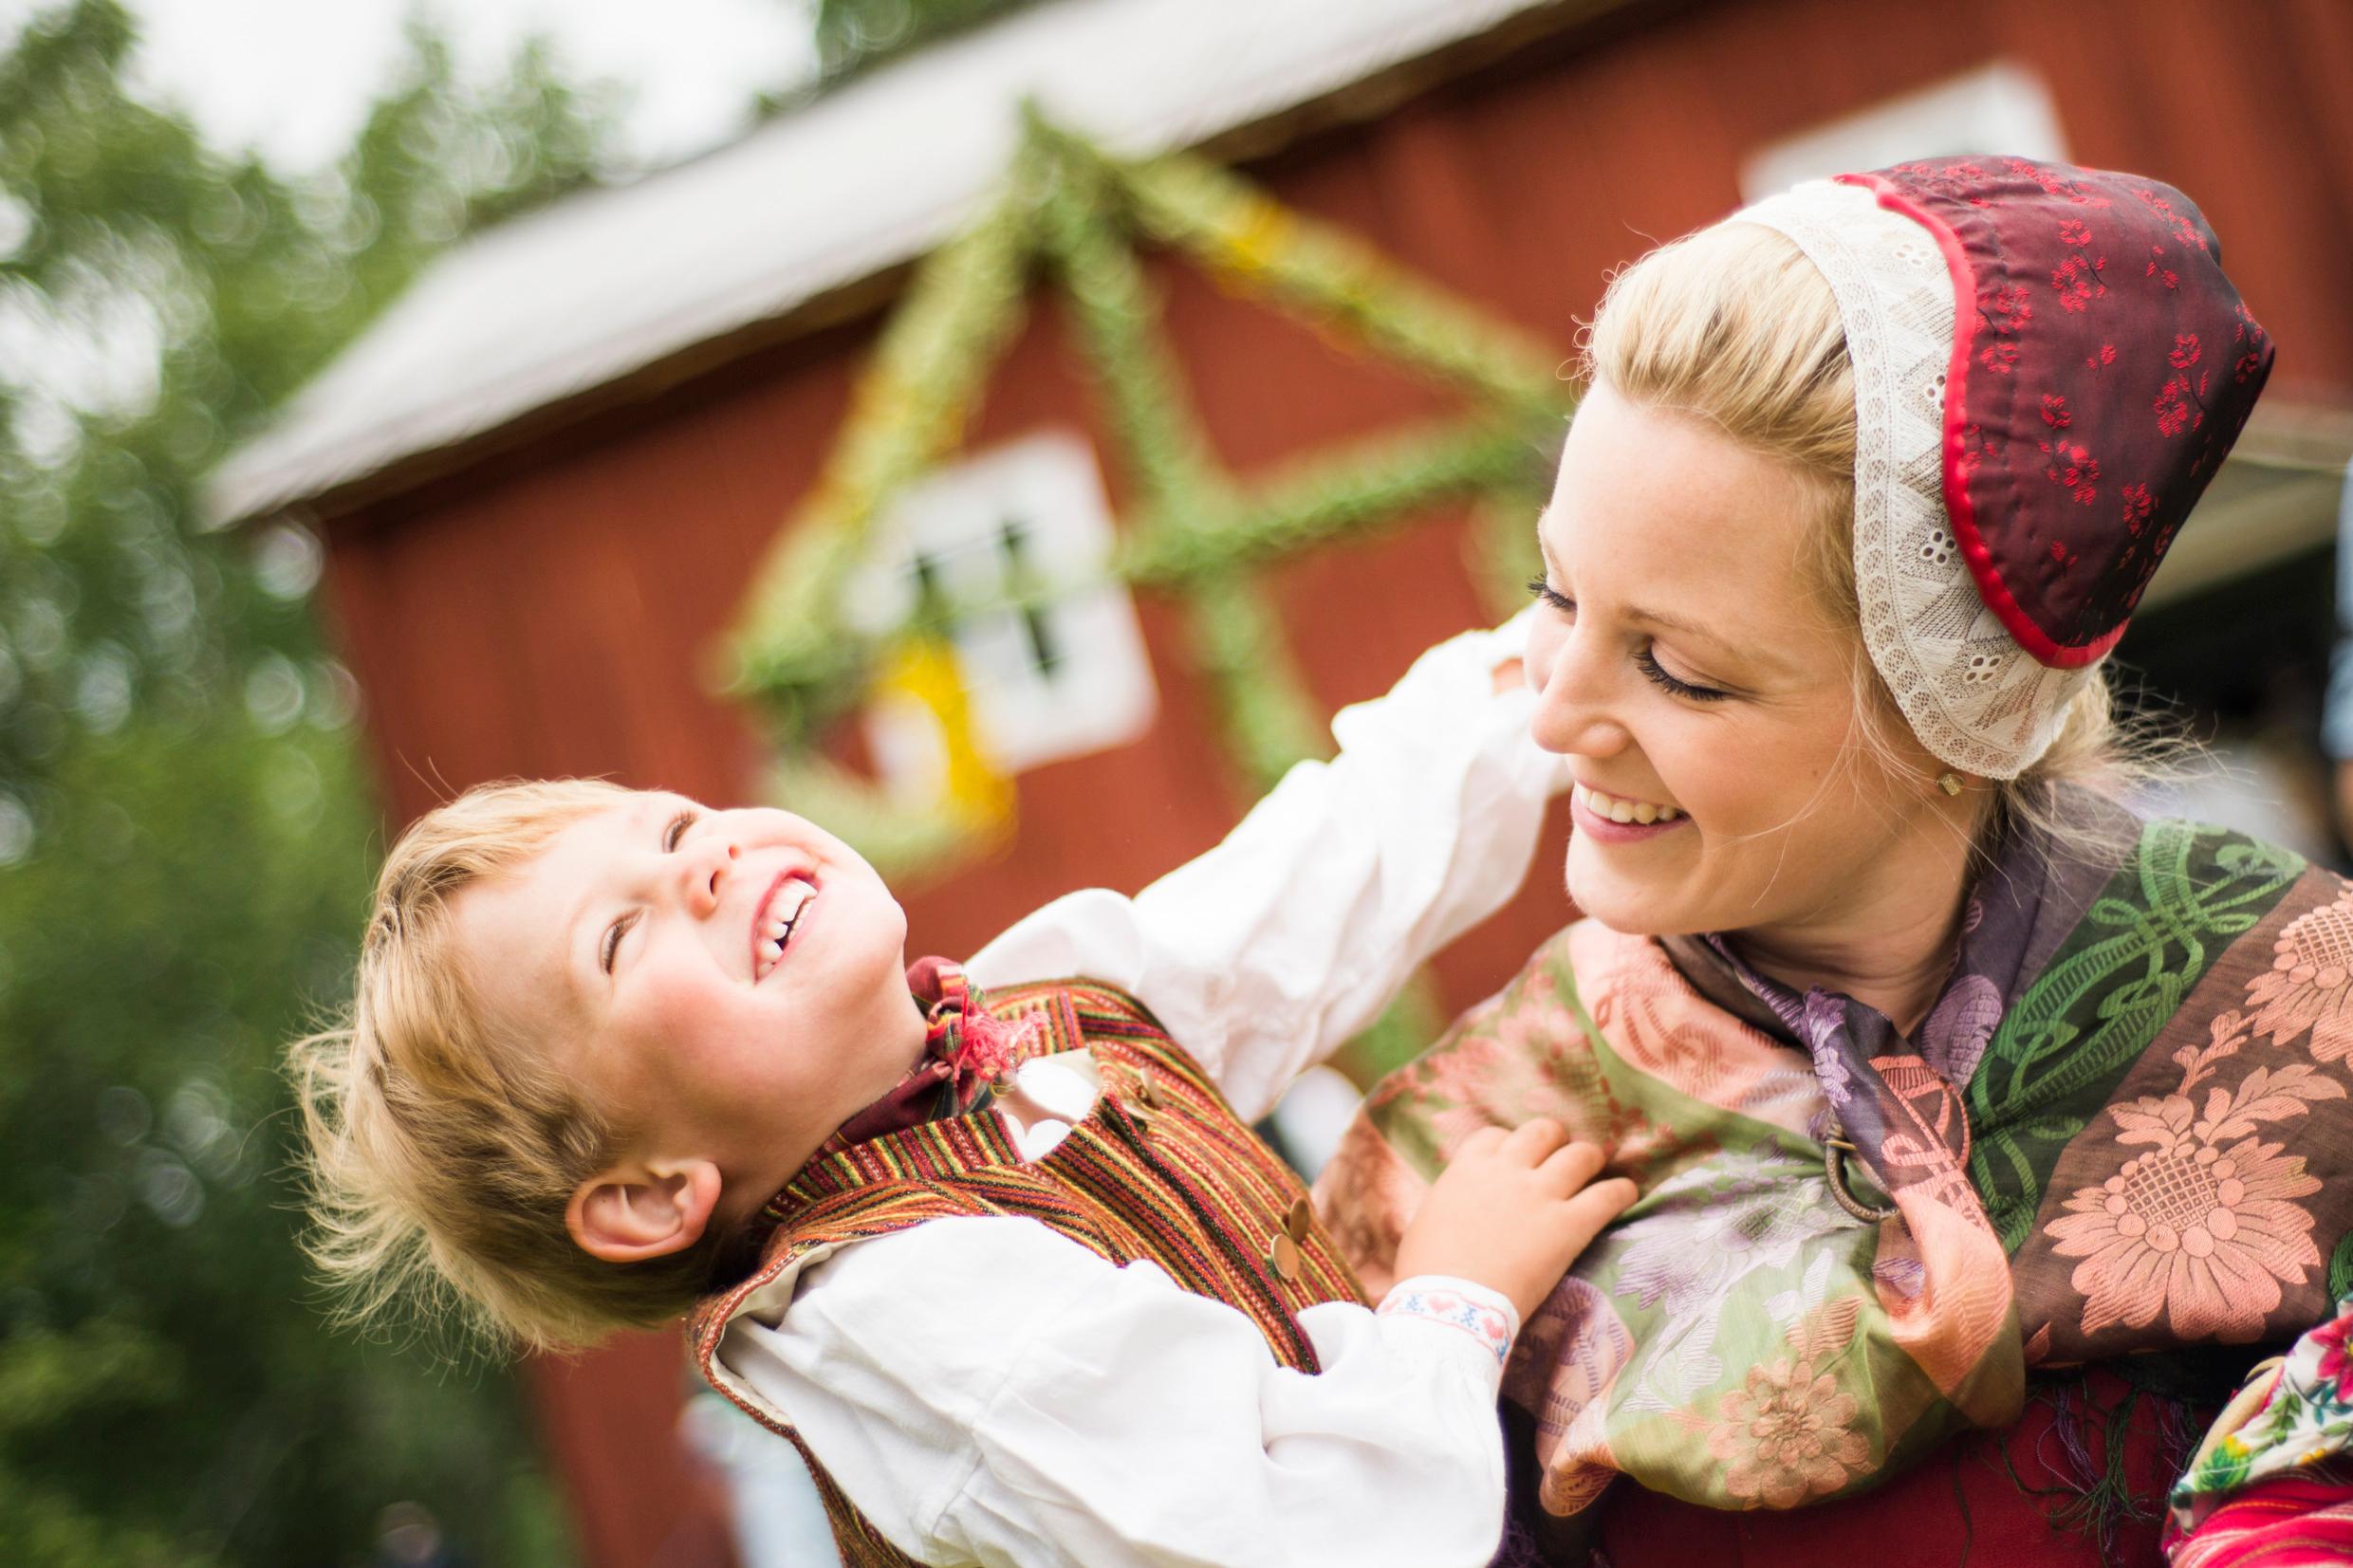 A woman and a child in traditional costumes outside. A Midsummer pole stands in the background.